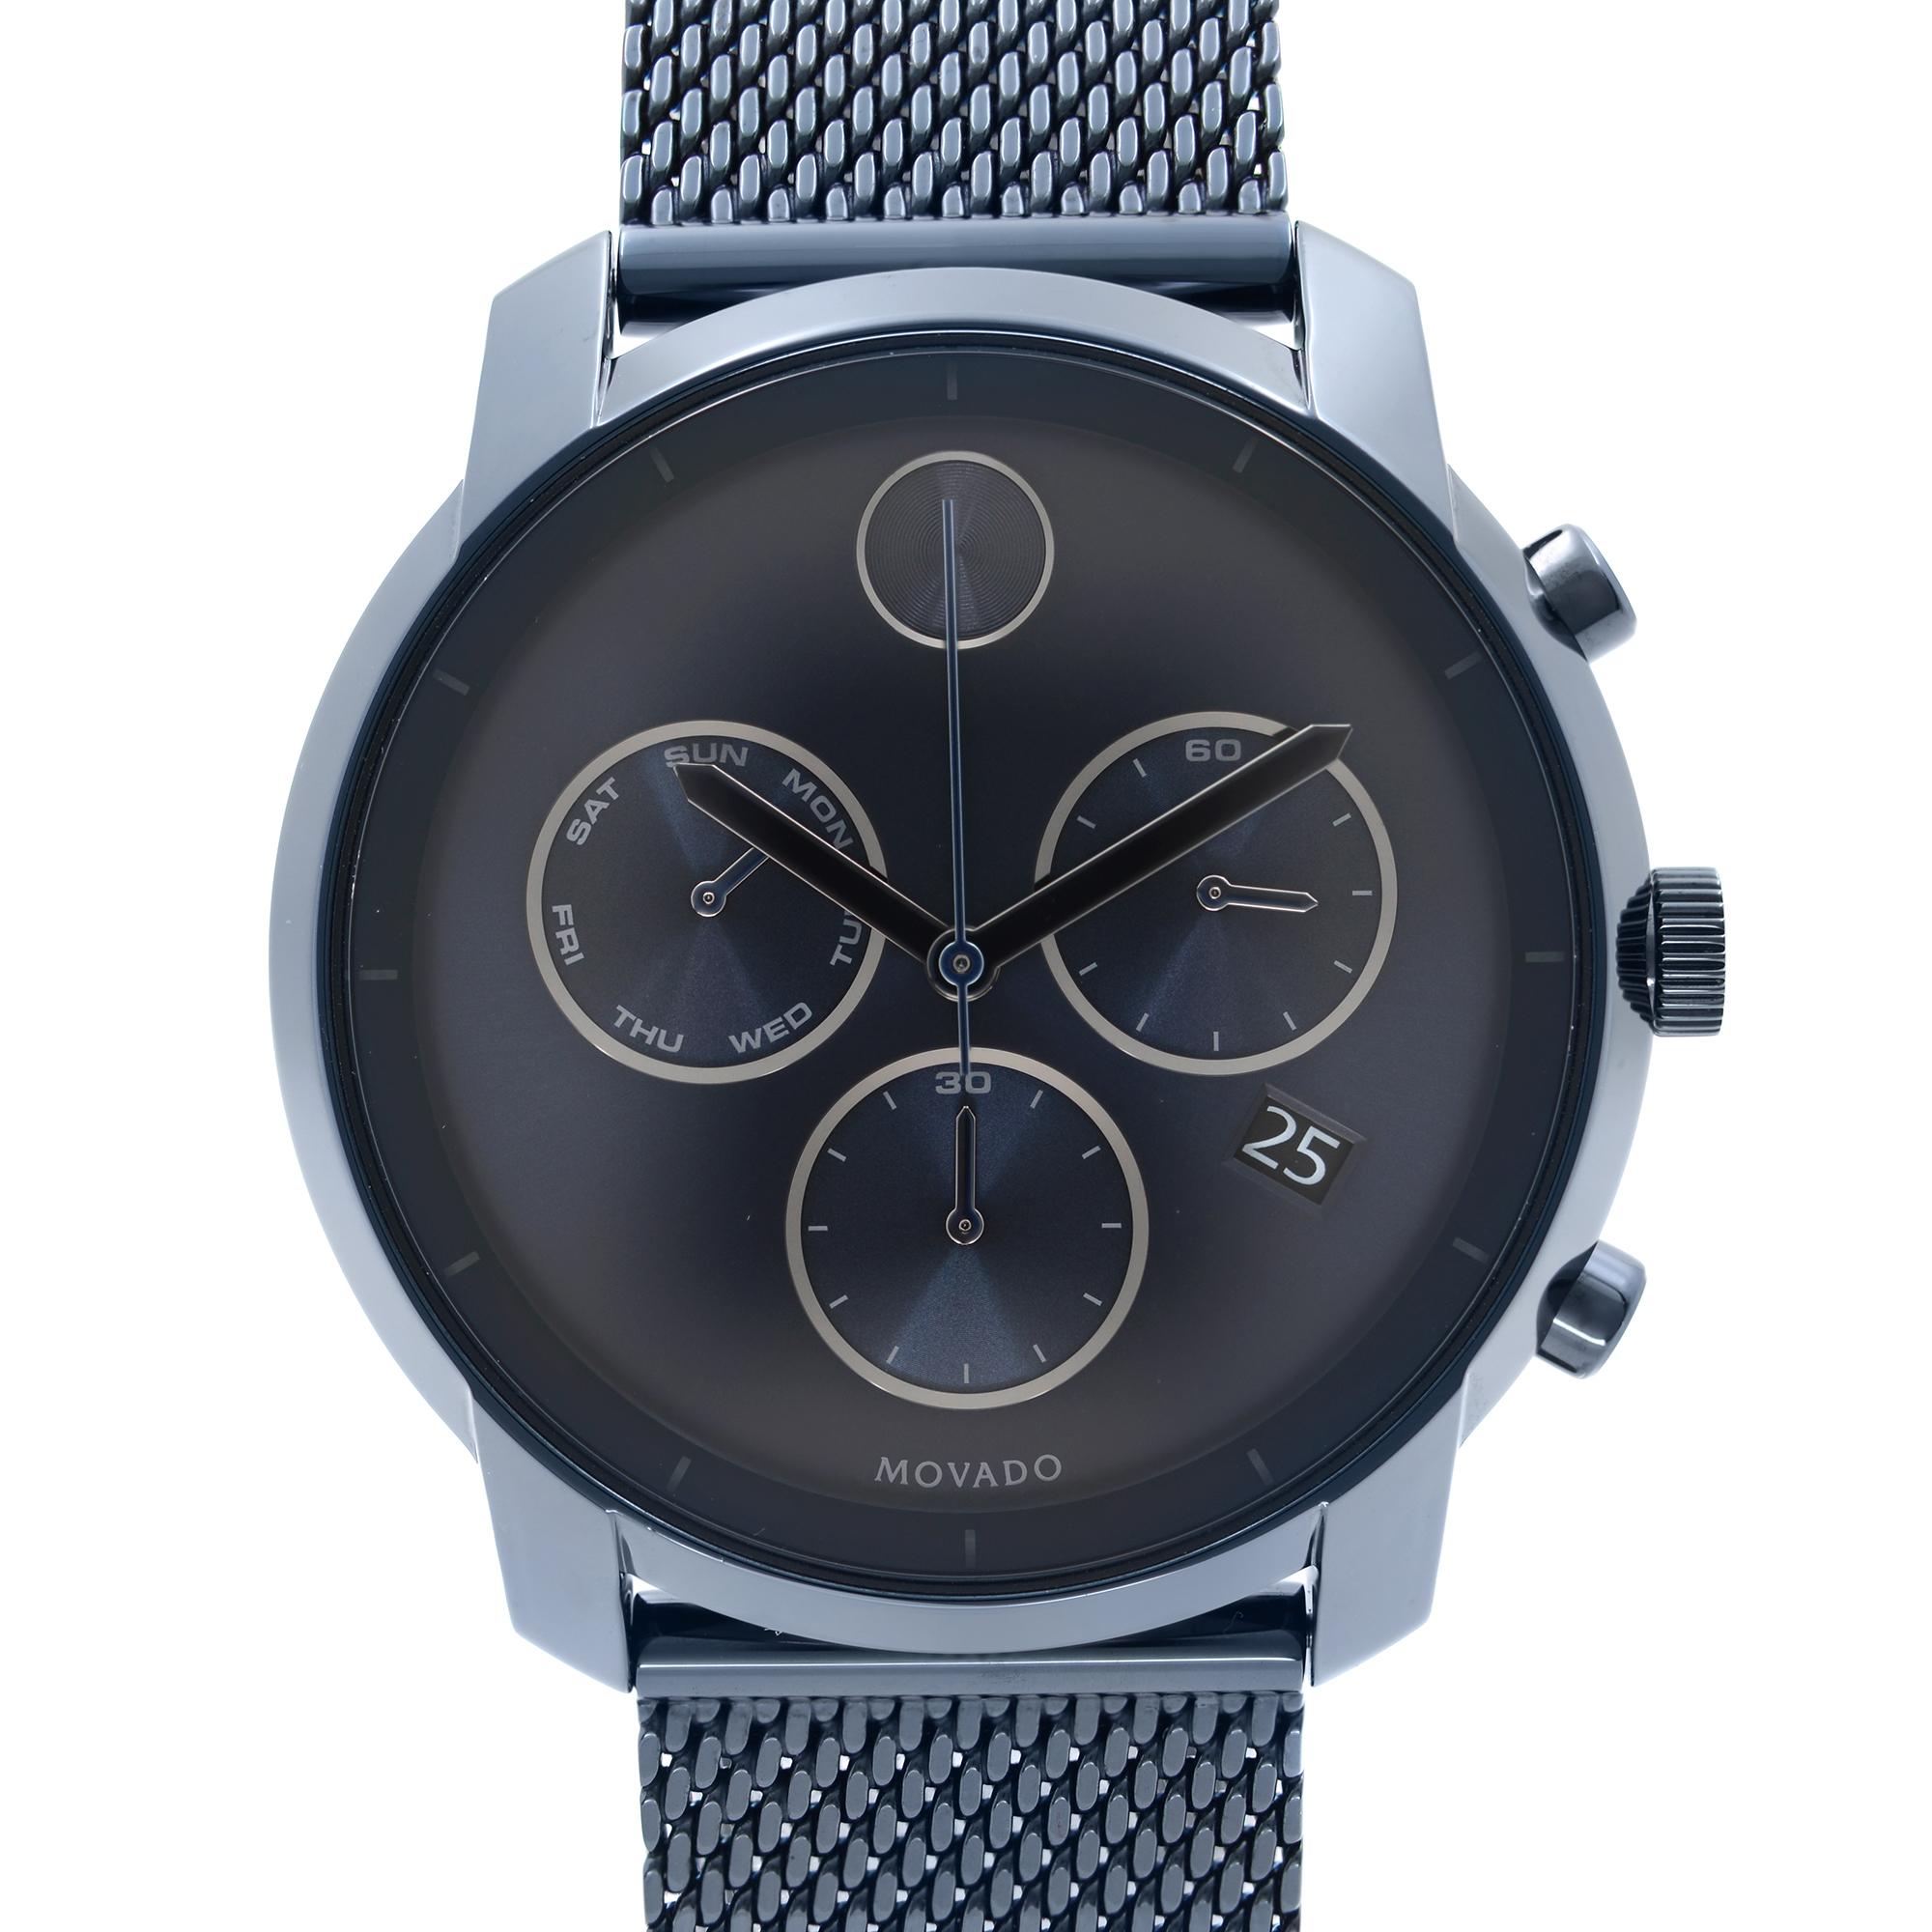 Pre-owned Movado Bold  3600403 is a beautiful men's timepiece that is powered by quartz (battery) movement which is cased in a stainless steel case. It has a round shape face, chronograph, date indicator, small seconds subdial dial and has hand